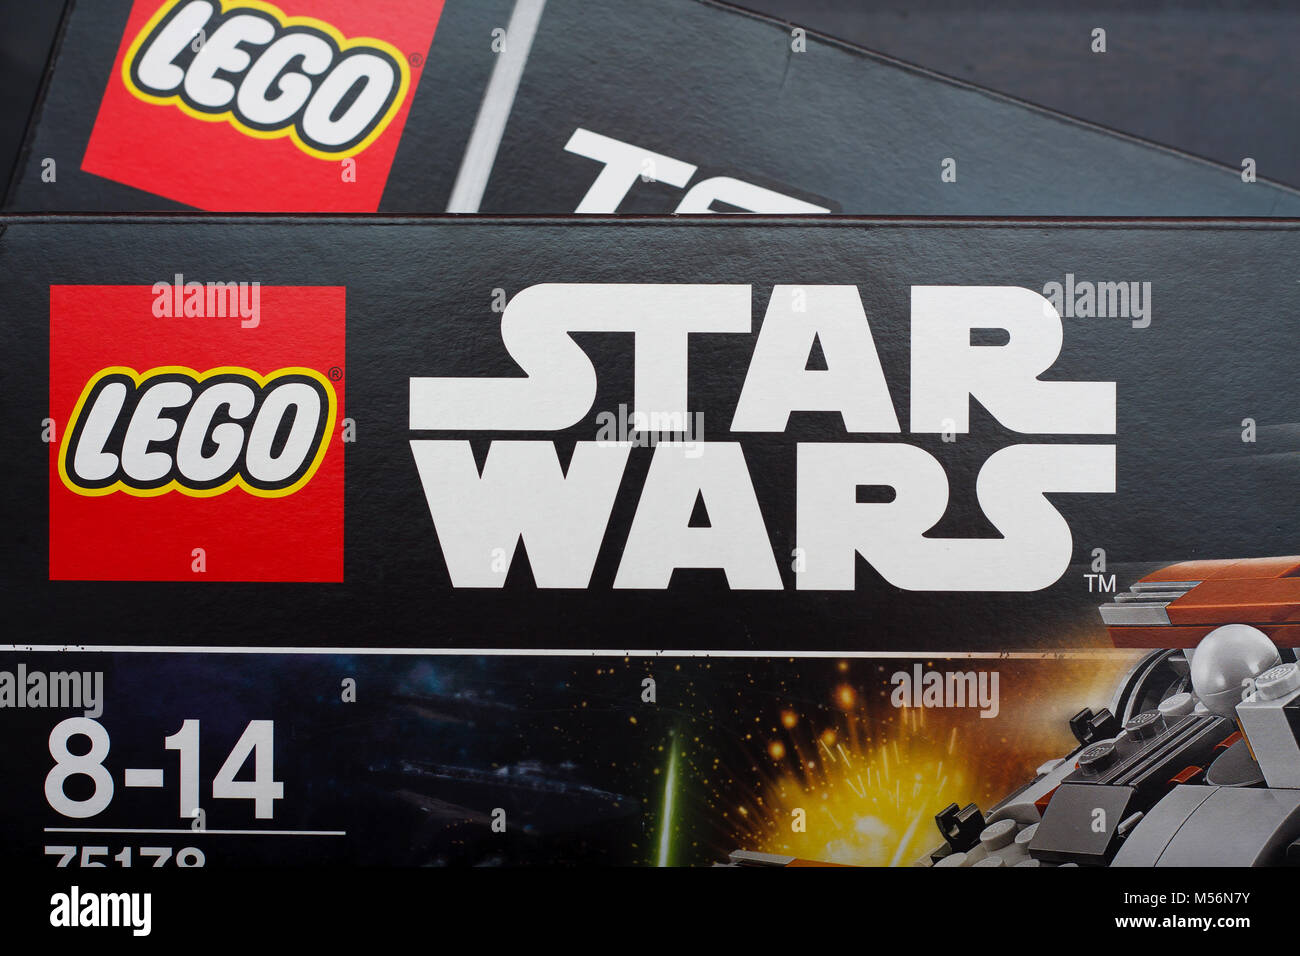 GDANSK, POLAND - DECEMBER 29, 2017. Lego logo on the box with Lego Star Wars blocks.  Lego is a line of plastic construction toys that are manufacture Stock Photo